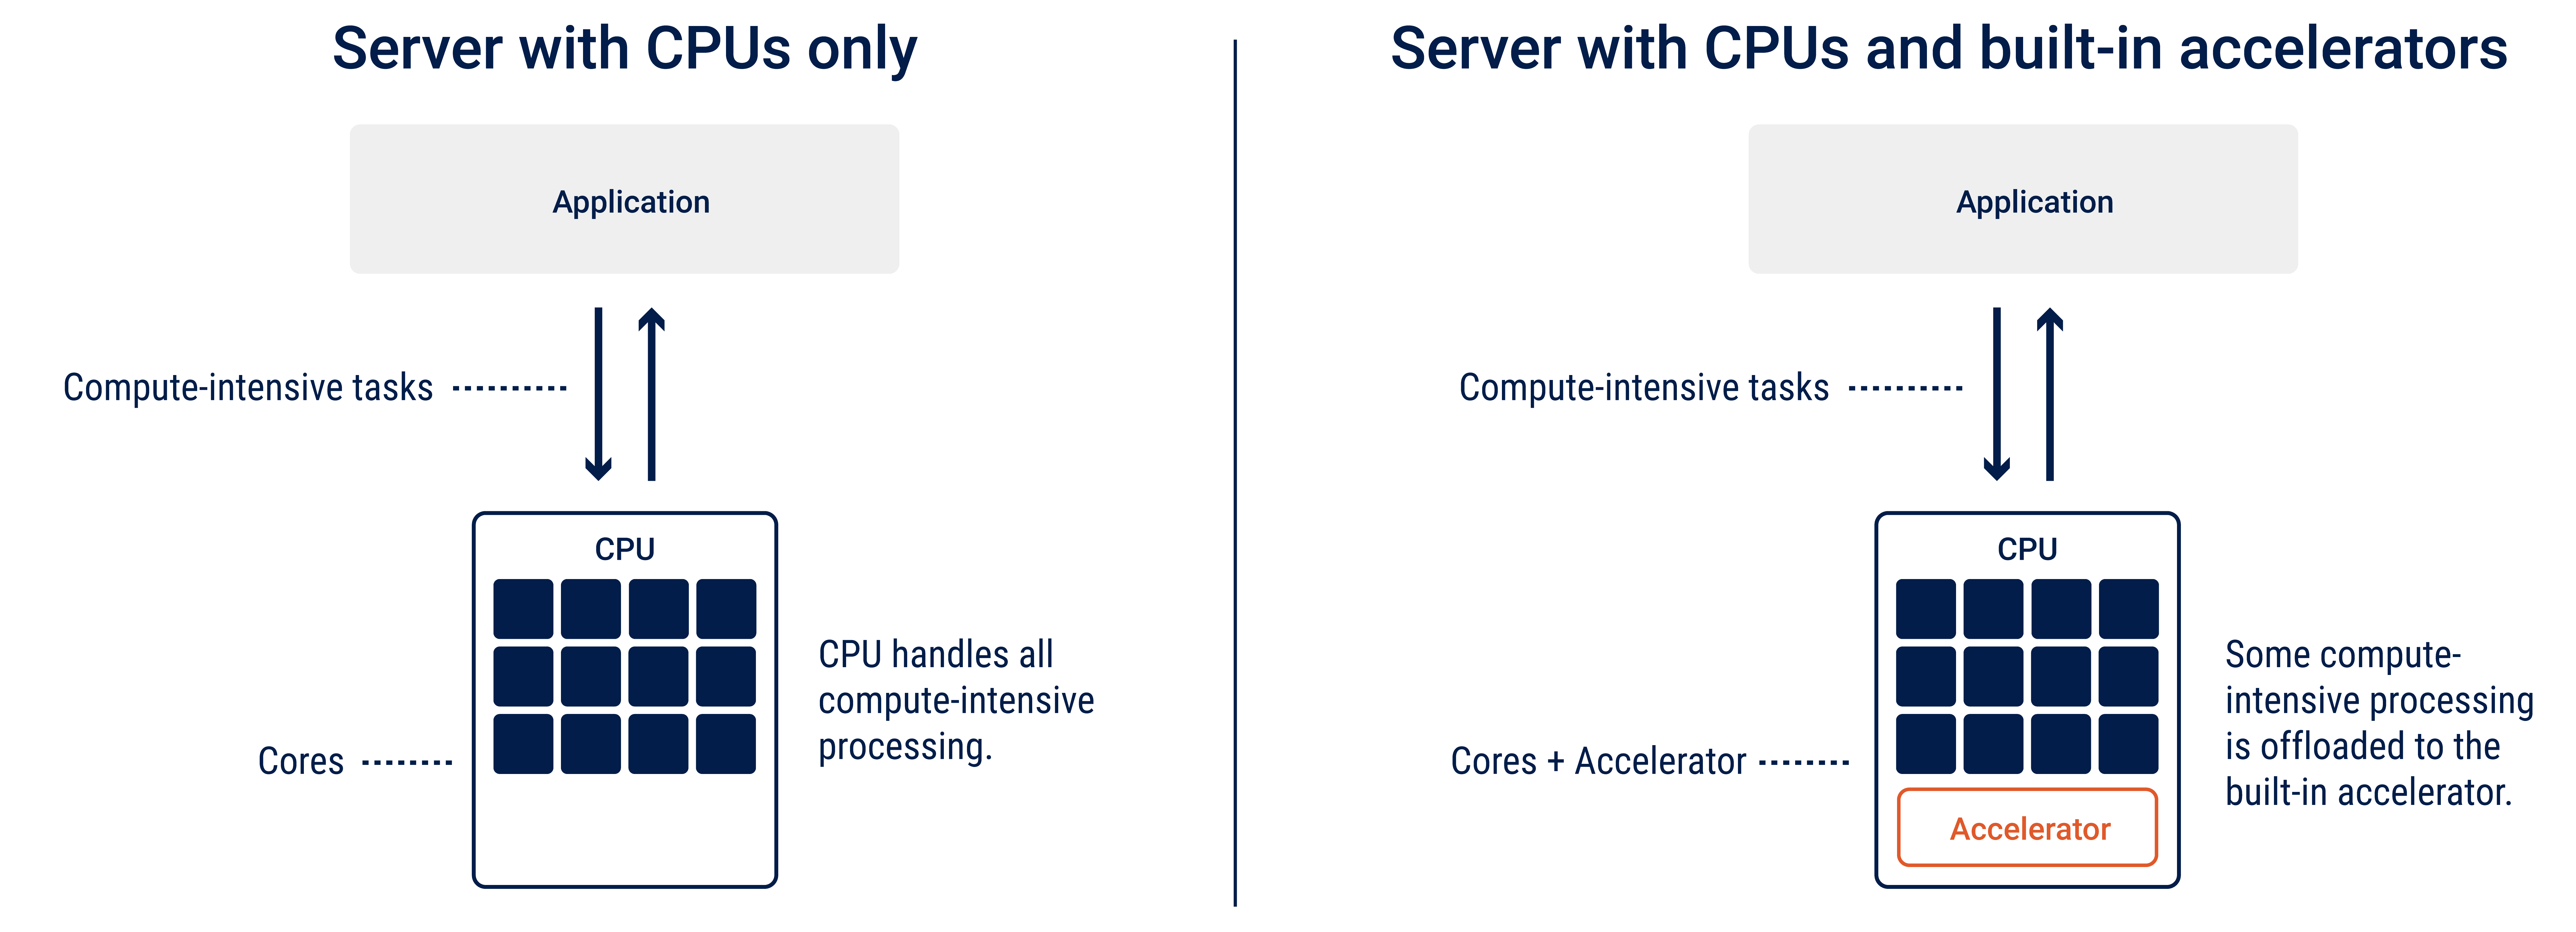 The diagram illustrates the difference between a "Server with CPUs only" (on the left) and a "Server with CPUs and built-in accelerators" (on the right). The "Server with CPUs only" diagram shows that the CPU cores handle all compute-intensive processing for an application. The "Server with CPUs and built-in accelerators" diagram shows that some compute-intensive processing for an application is handled by the CPU cores and some is offloaded to the built-in accelerator.